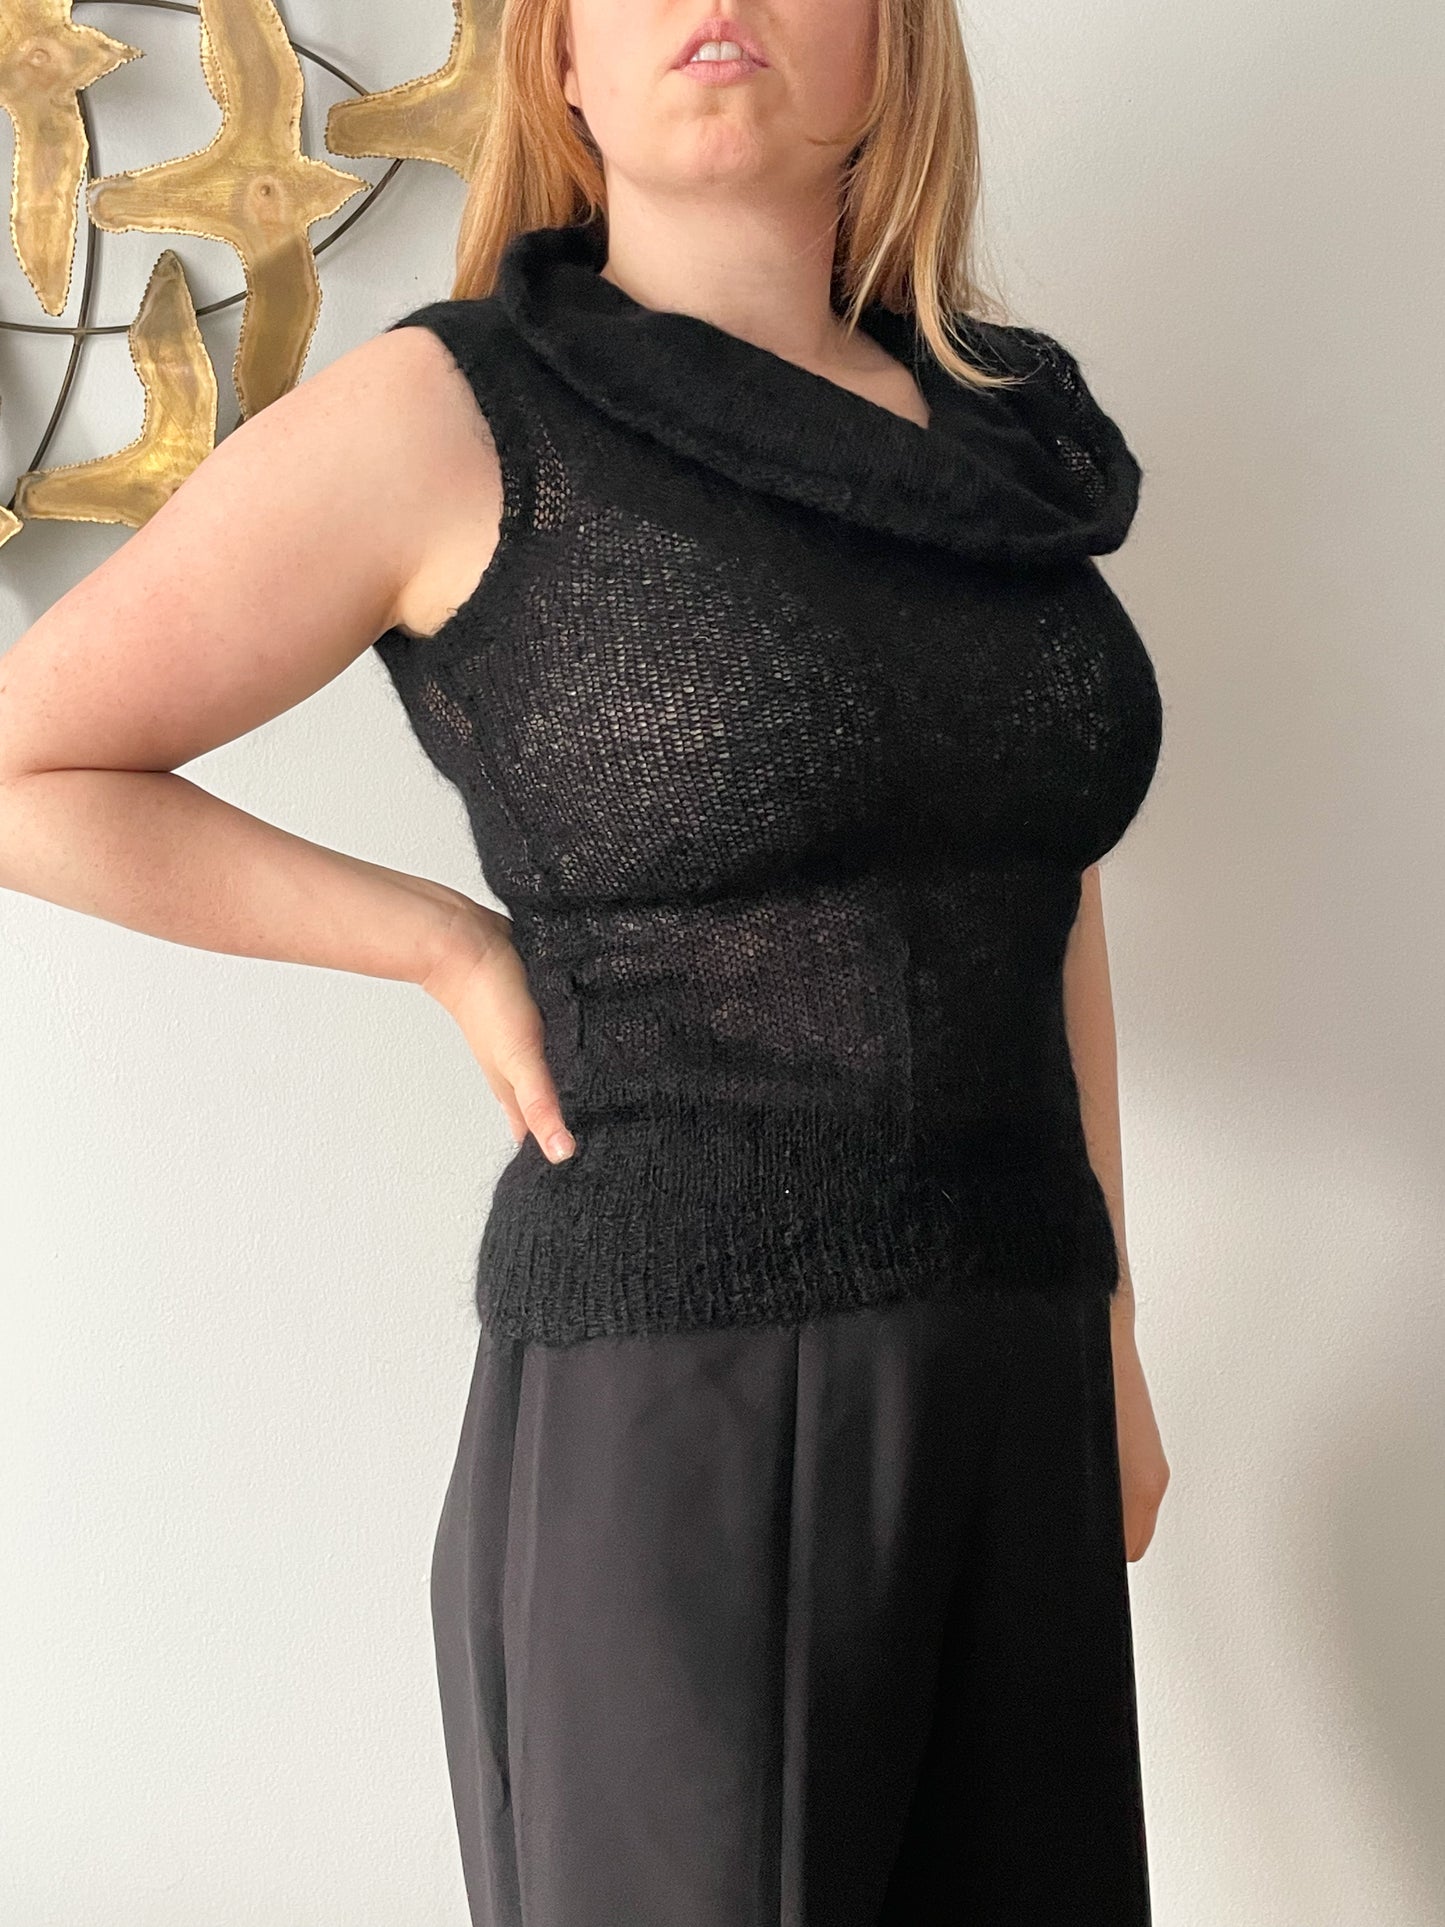 Lux Black Sheer Knit Cowl Neck Mohair Wool Sleeveless Sweater Top - XS/S